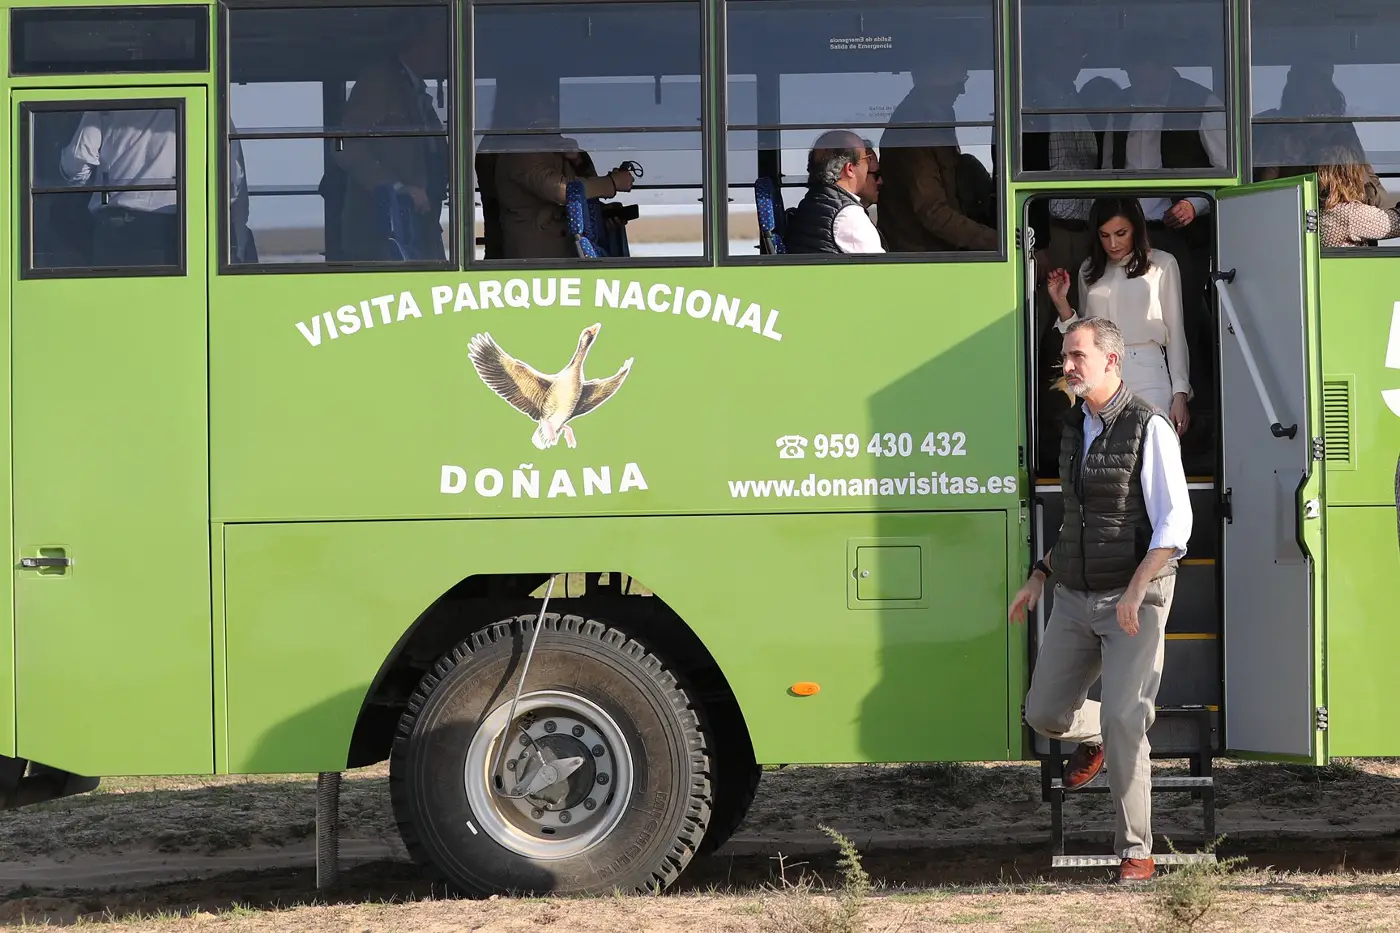 King Felipe and Queen Letizia of Spain visited National Park